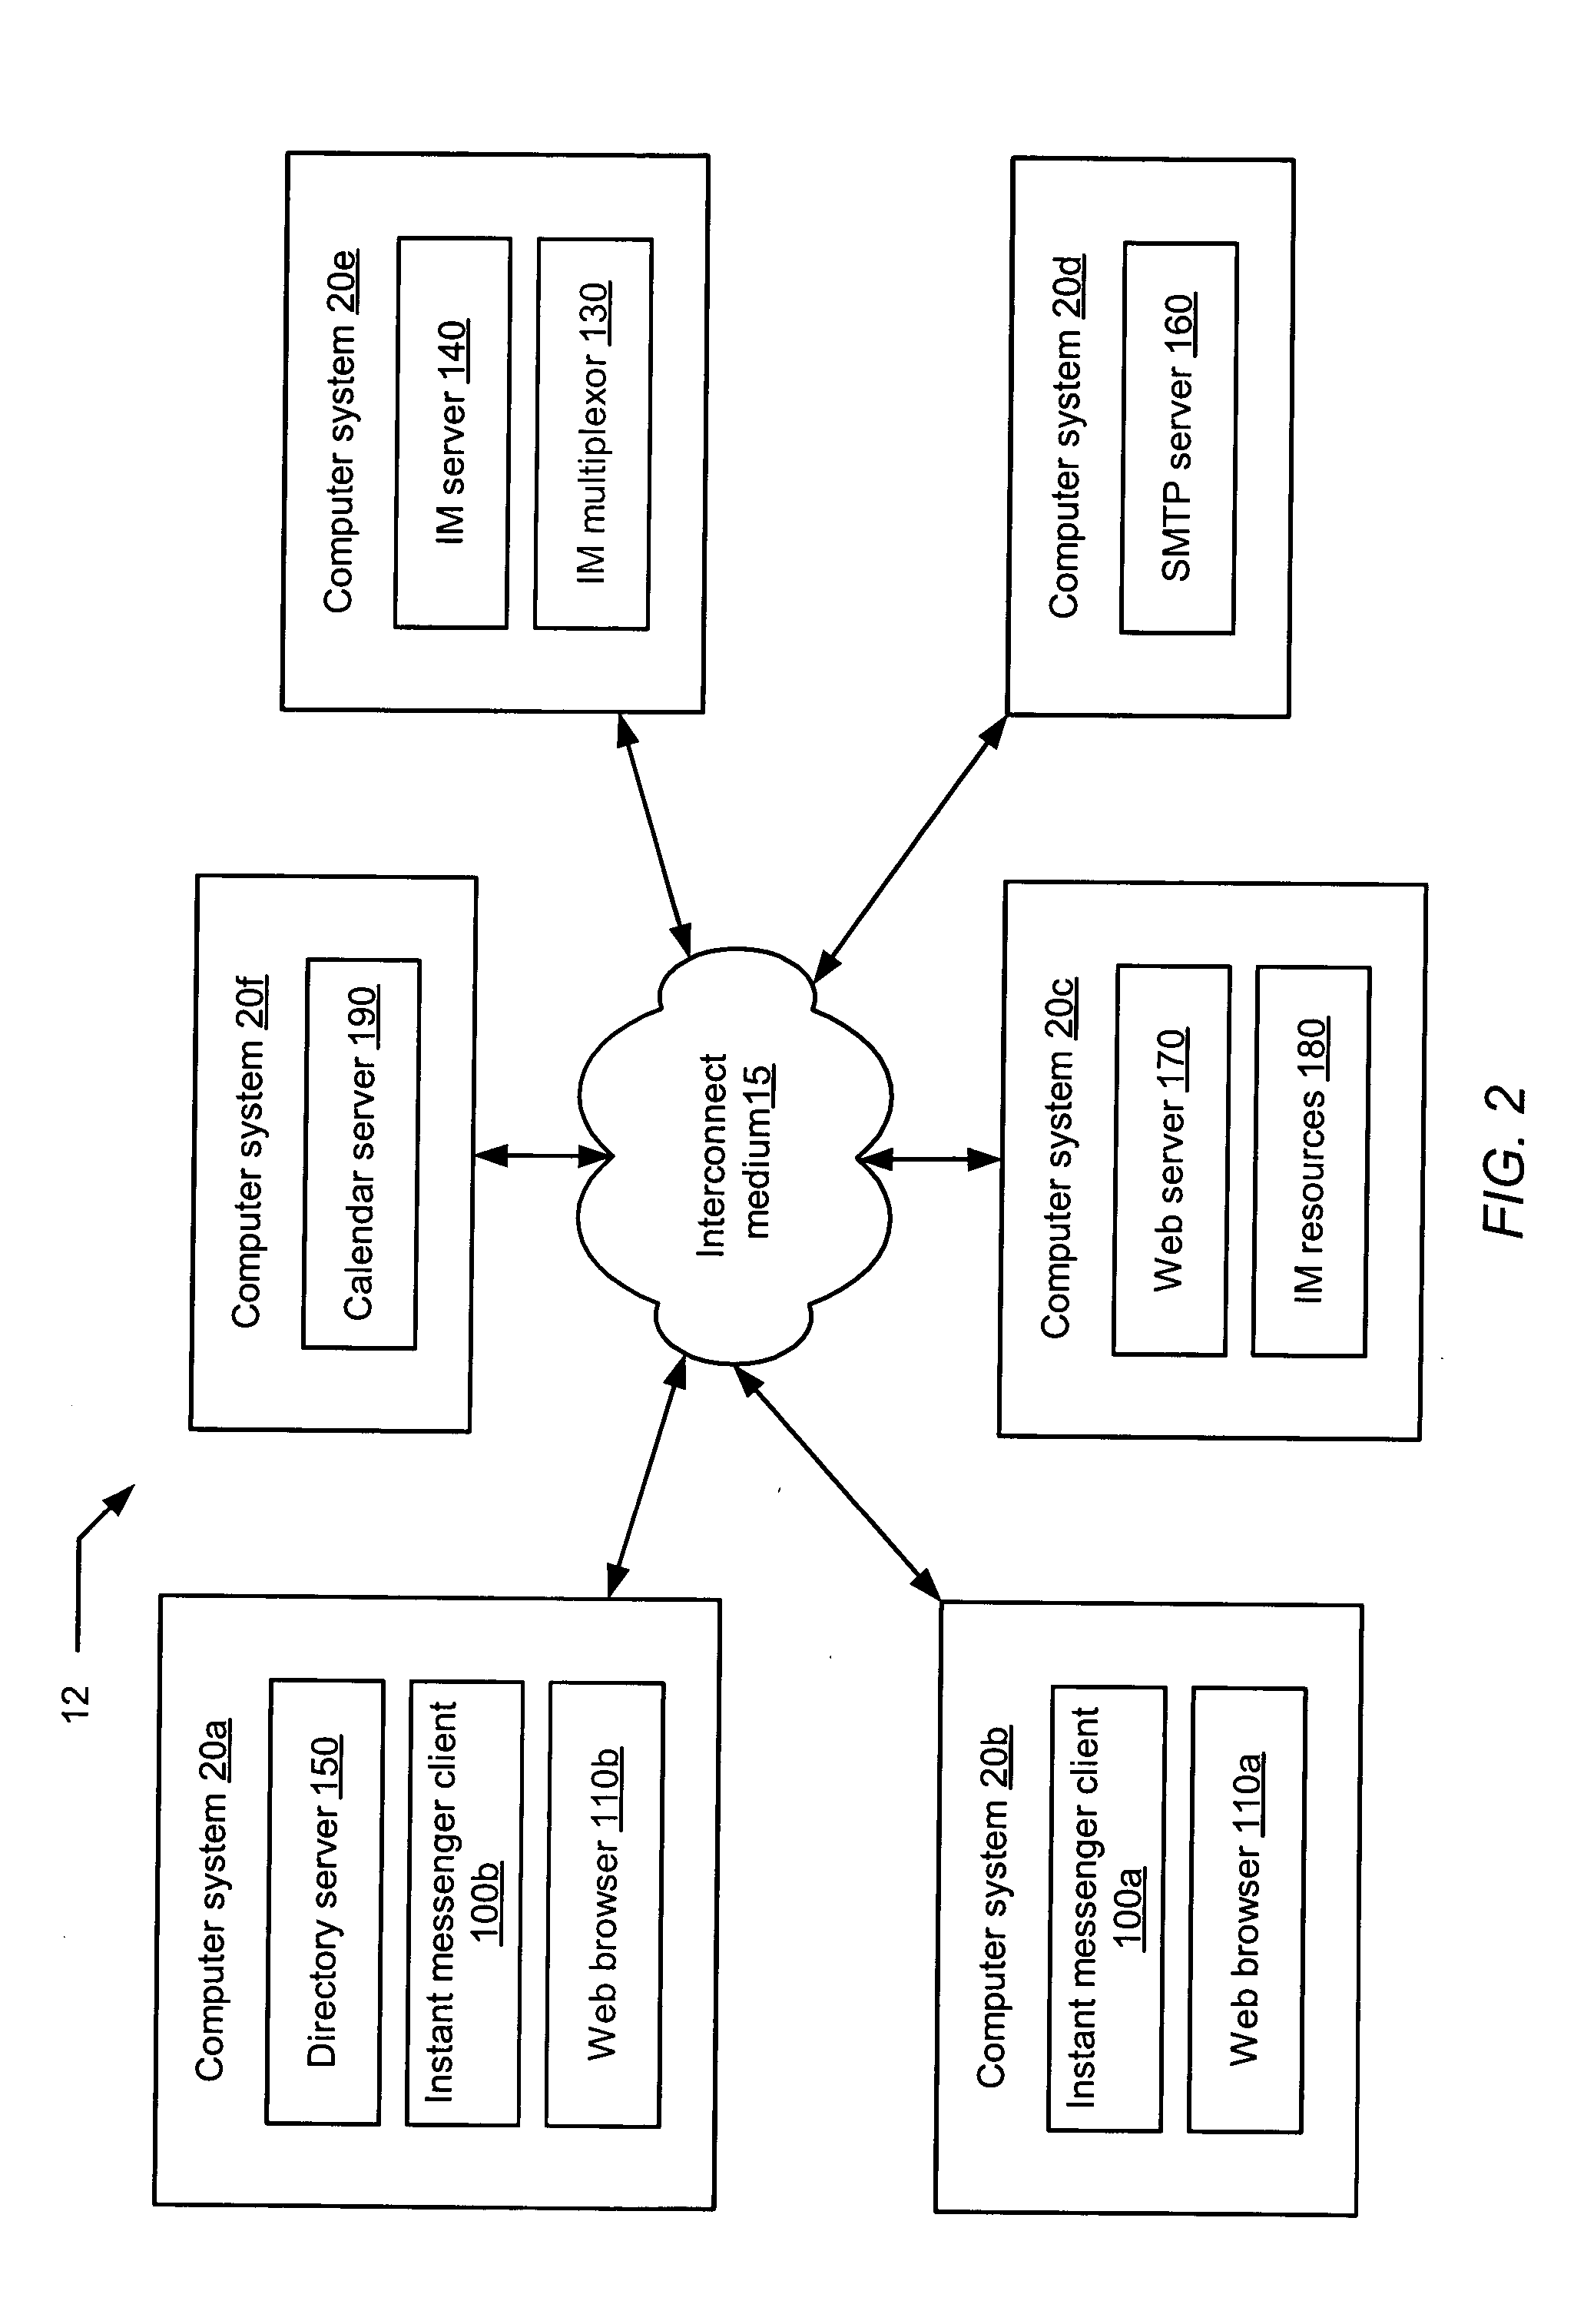 Method and system for presence state assignment based on schedule information in an instant messaging system